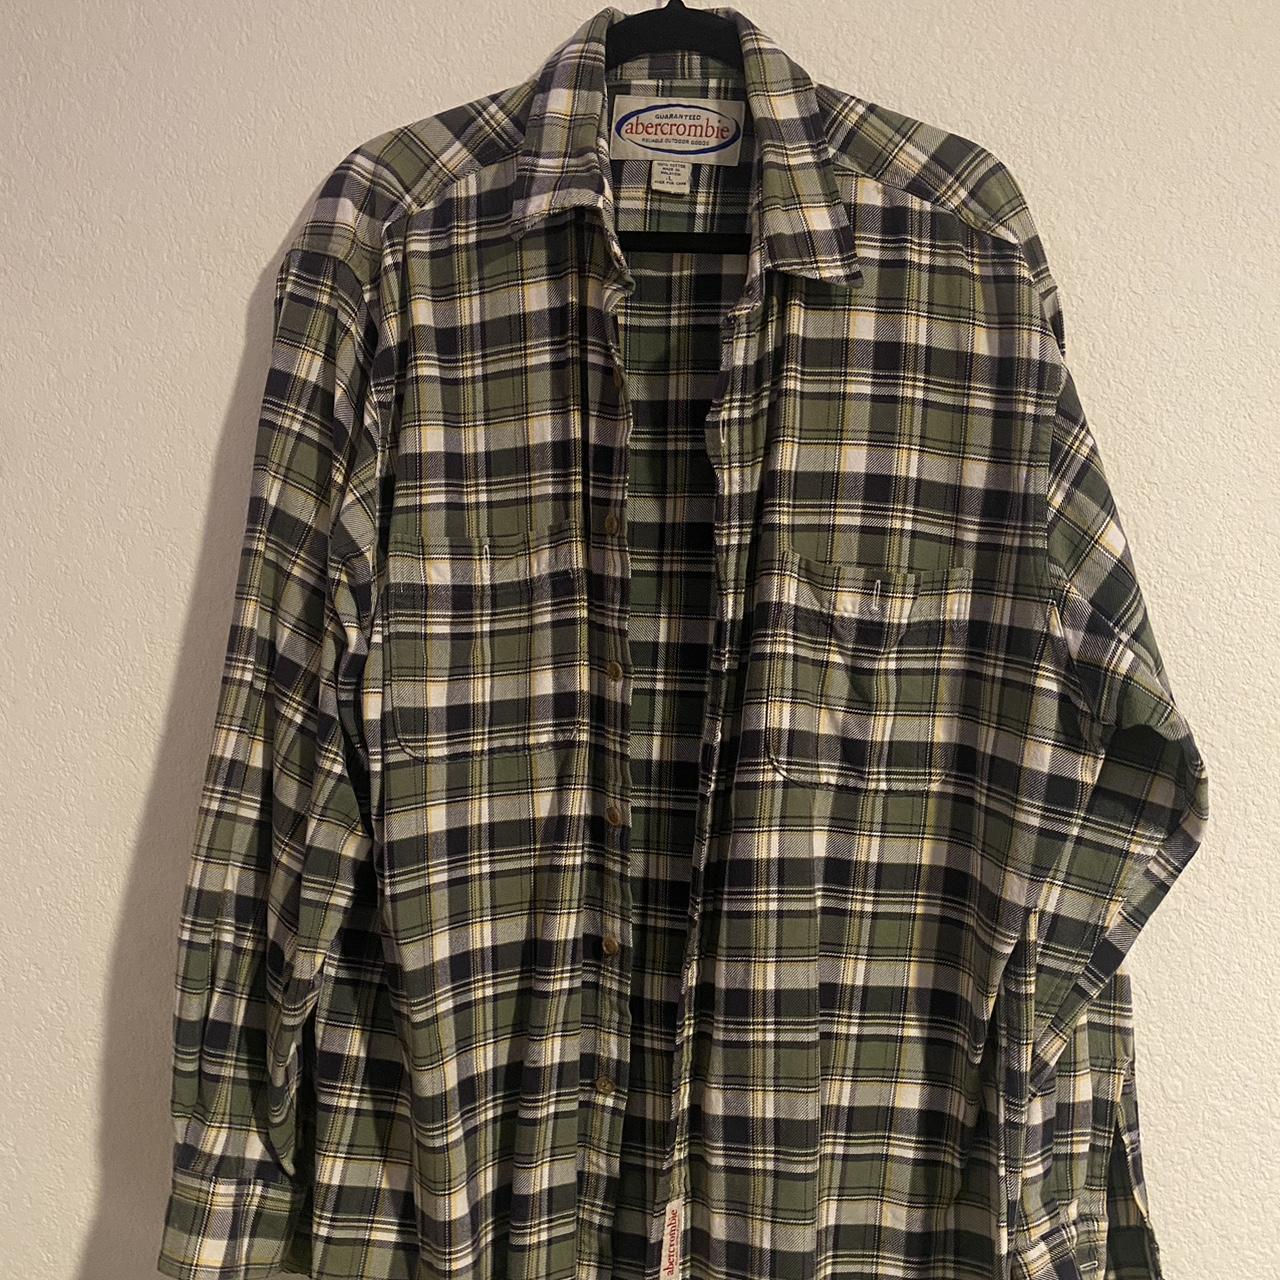 Light green yellow flannel with two front pockets - Depop